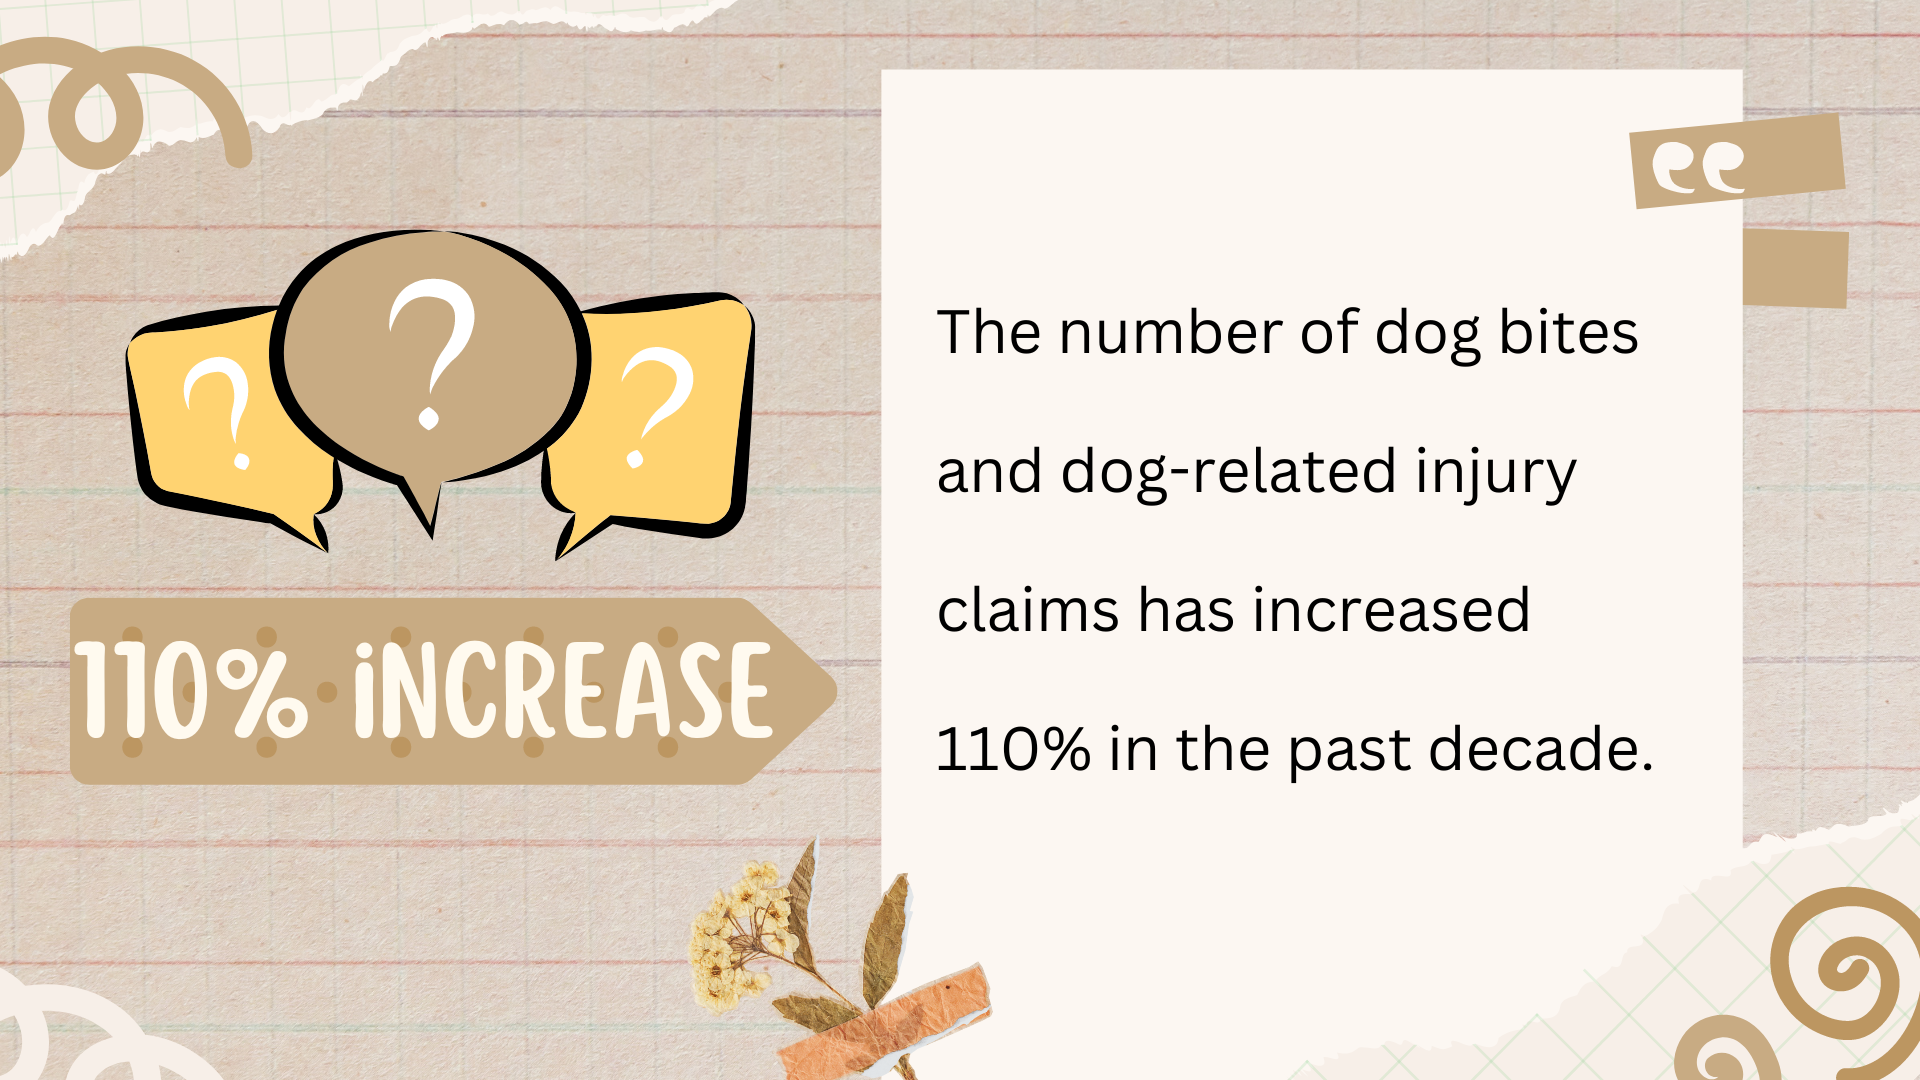 dog attack statistics - The number of dog bites and dog-related injury claims has increased 110% in the past decade.